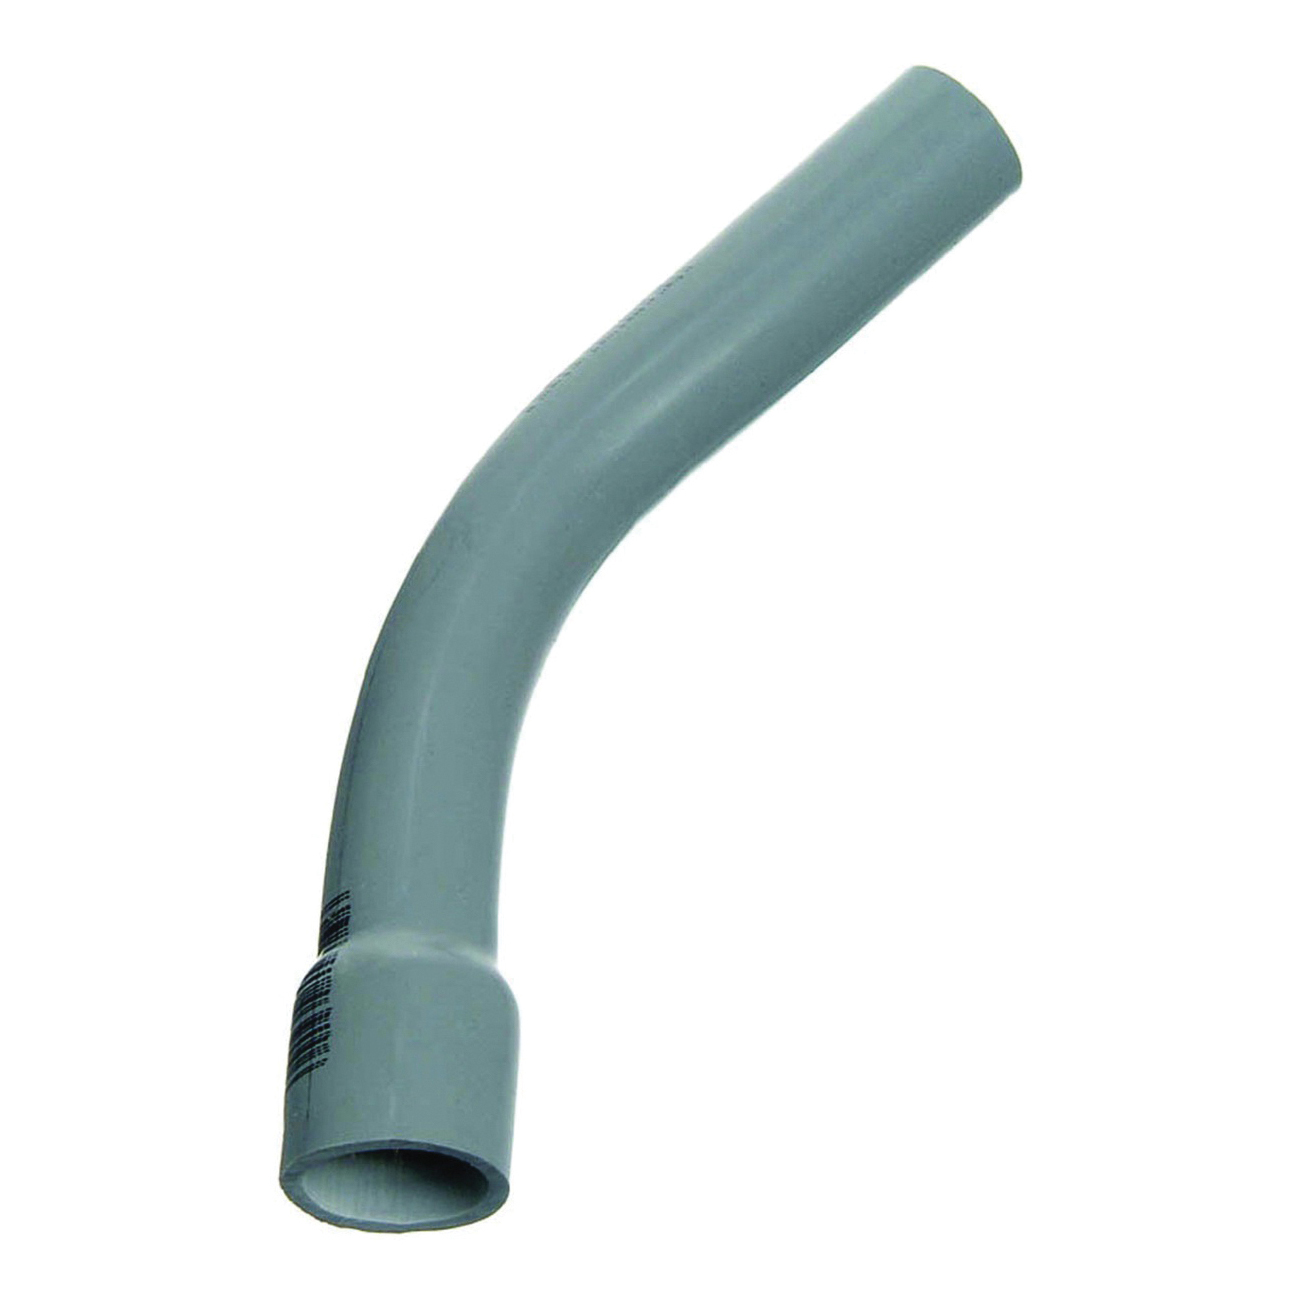 UA7AFB-CTN Elbow, 1 in Trade Size, 45 deg Angle, SCH 80 Schedule Rating, PVC, Bell End, Gray